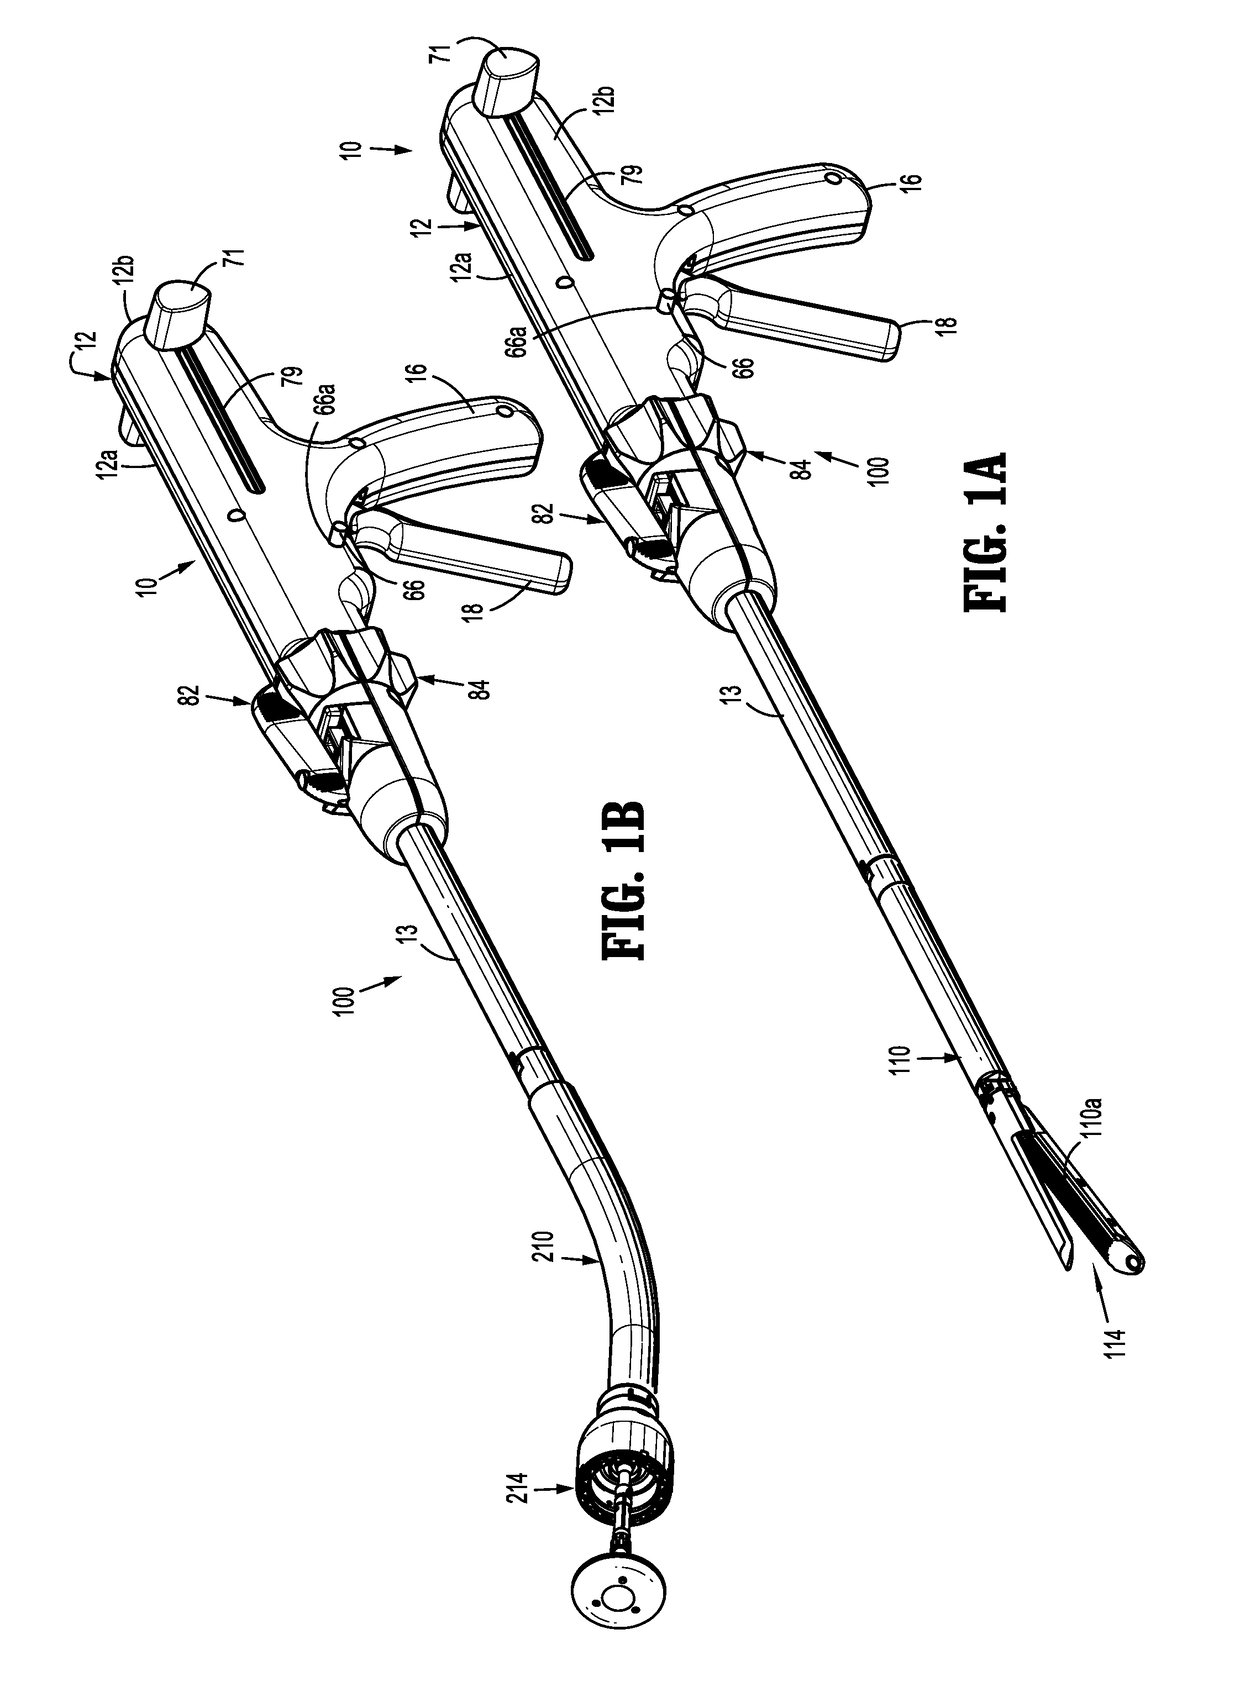 Universal handle for surgical instruments